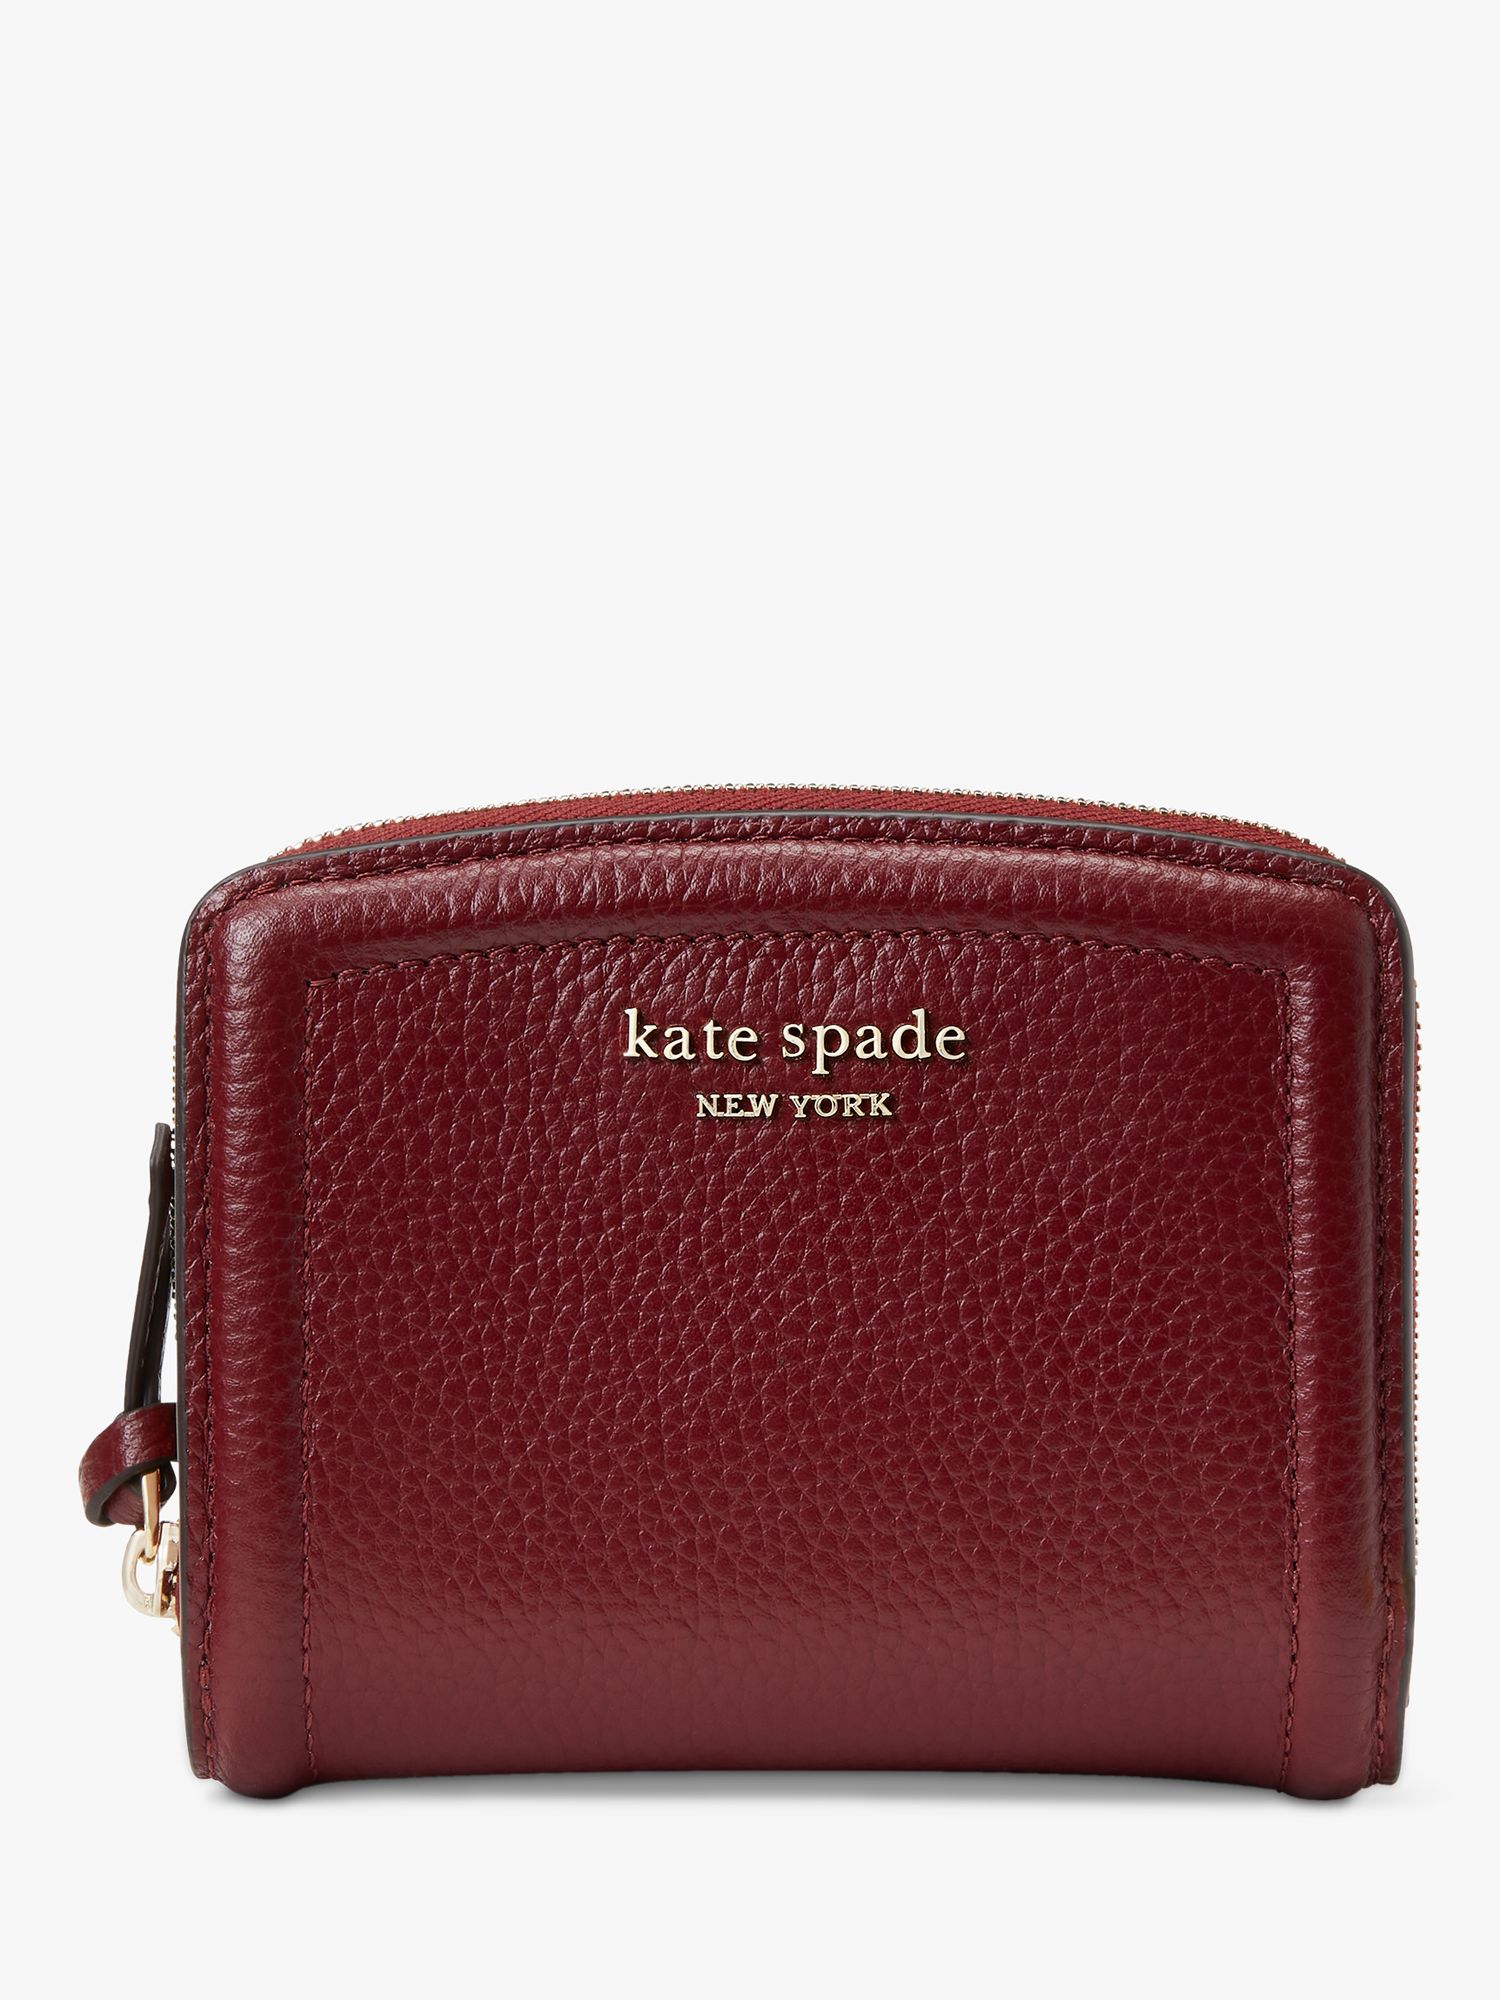 kate spade new york Knott Leather Compact Wallet, Autumnal Red at John  Lewis & Partners